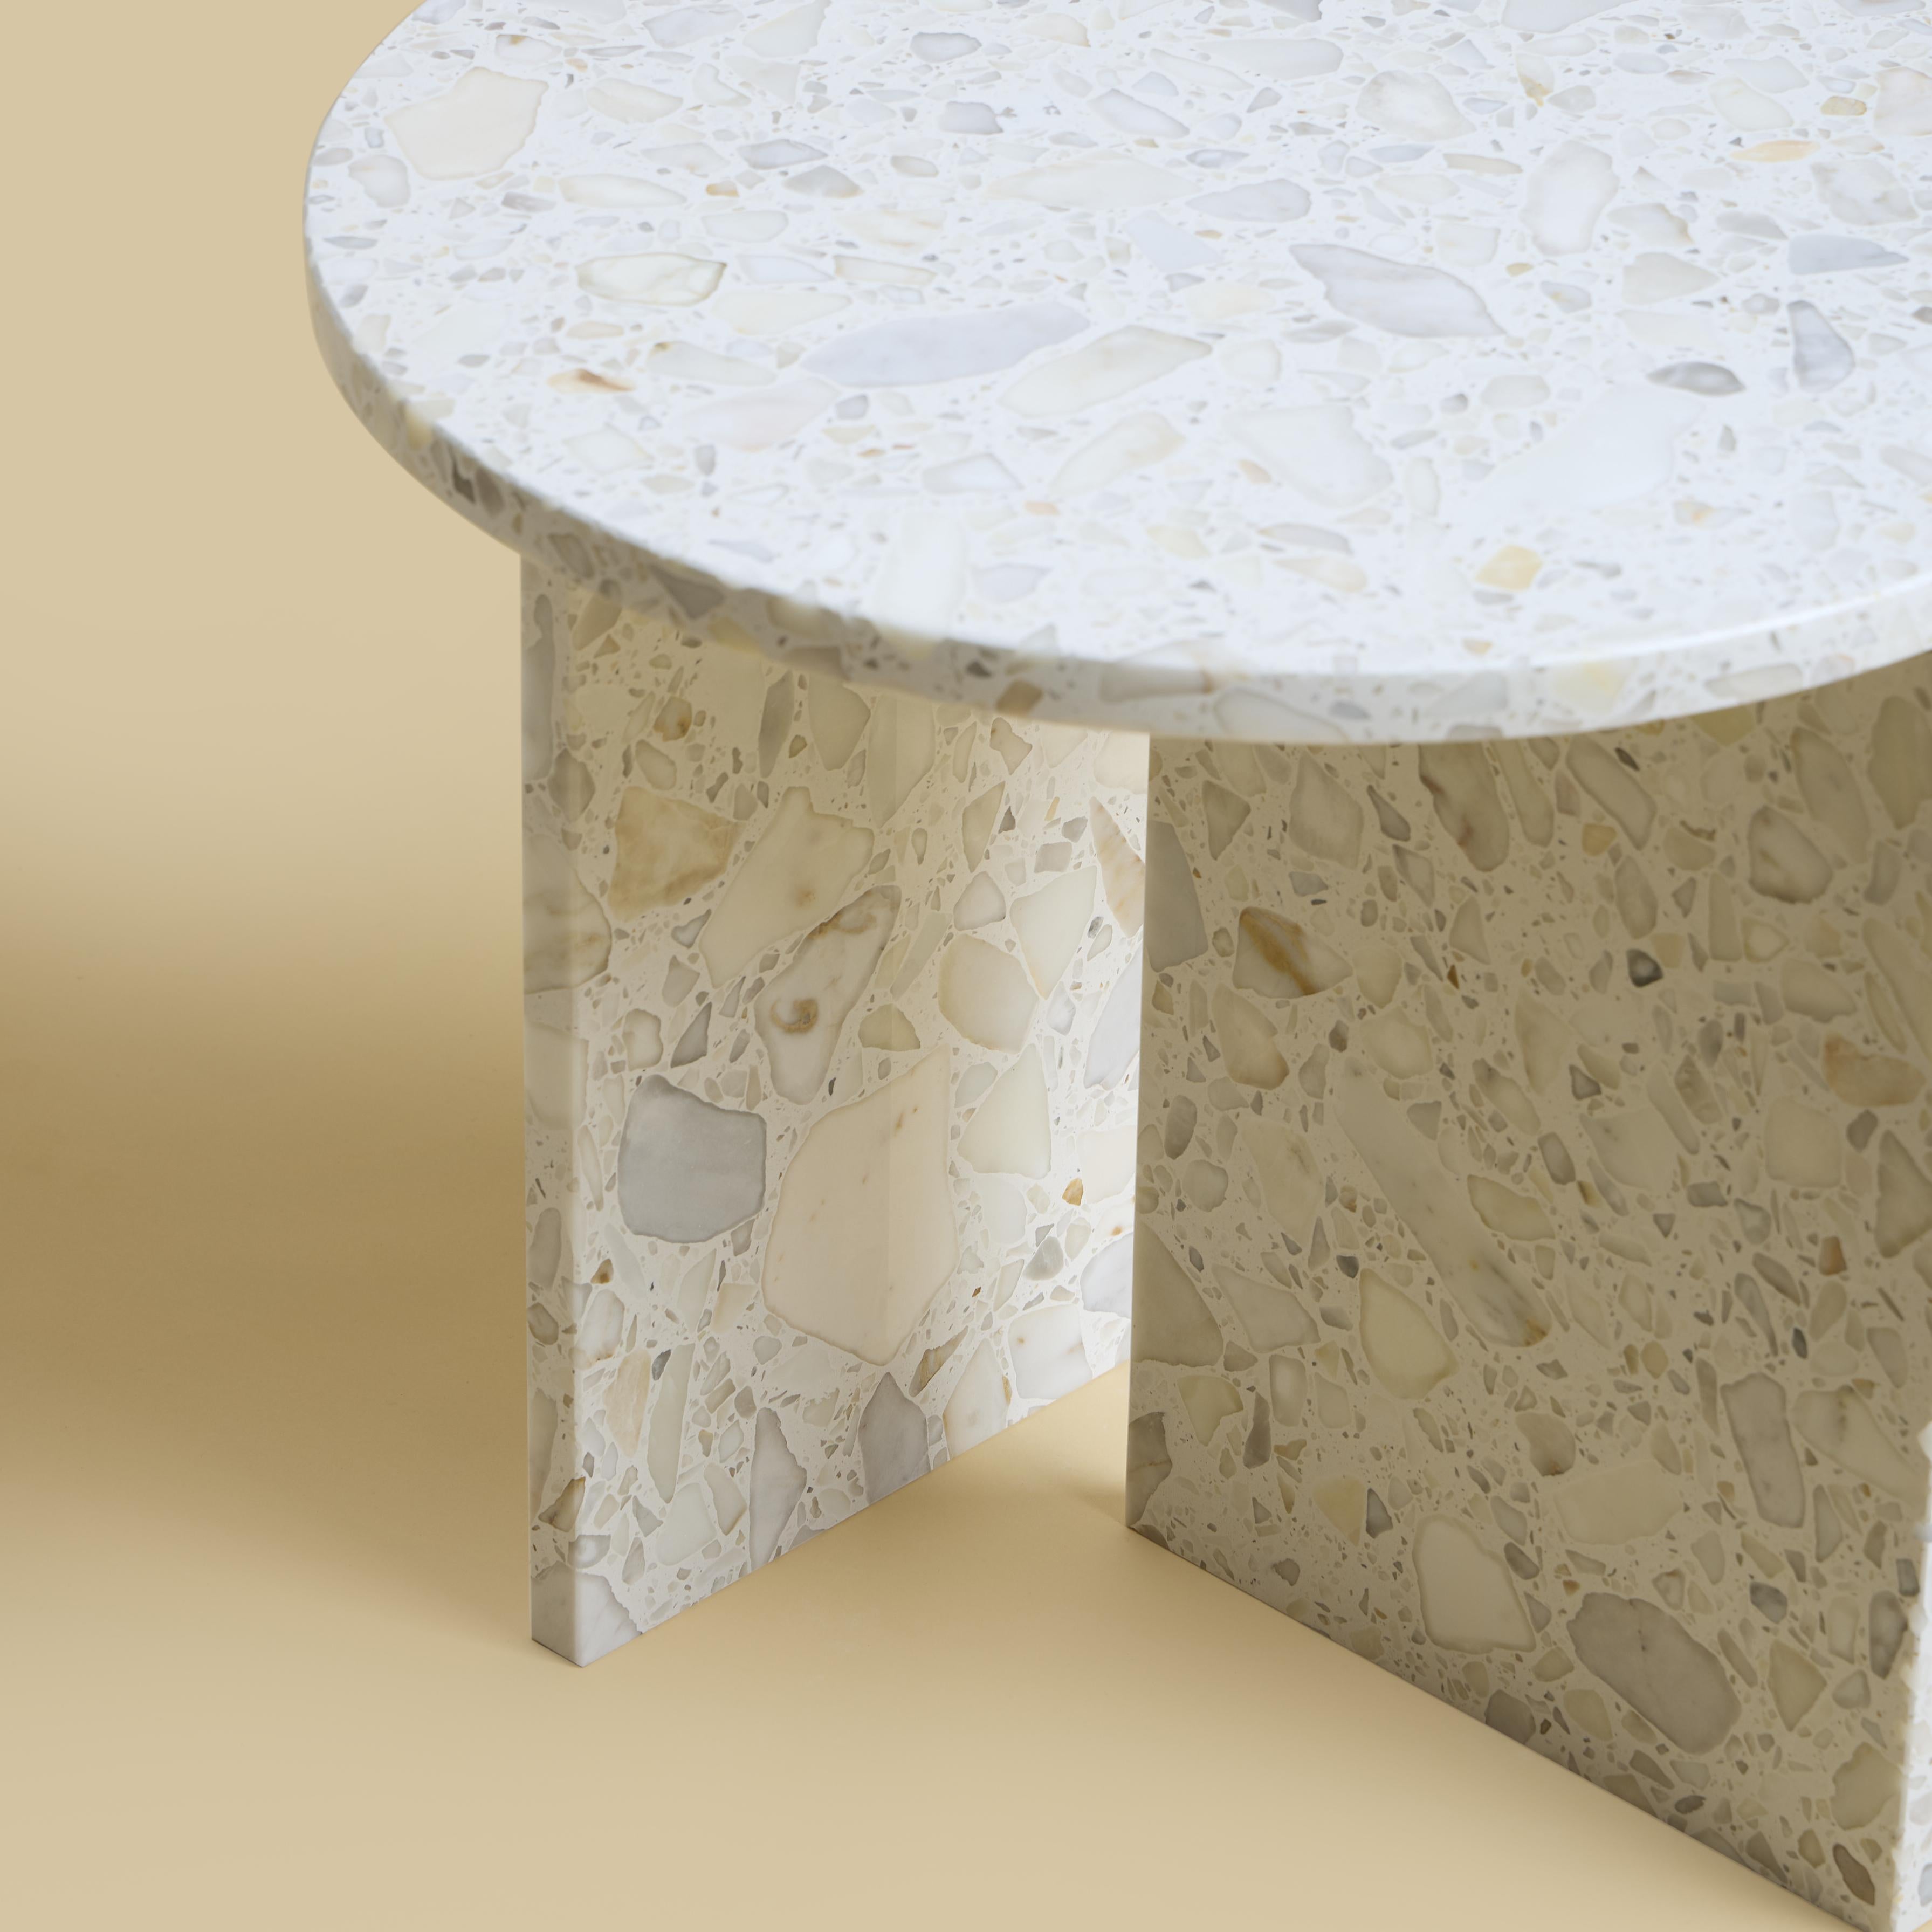 The Kyushu coffee table is made entirely of Carrara Terrazzo. The top is circular and 45cm in diameter, the legs are made from two marble boards in which one part is inlaid on the top as a very elegant detail.

The piece is designed by Lebanto and